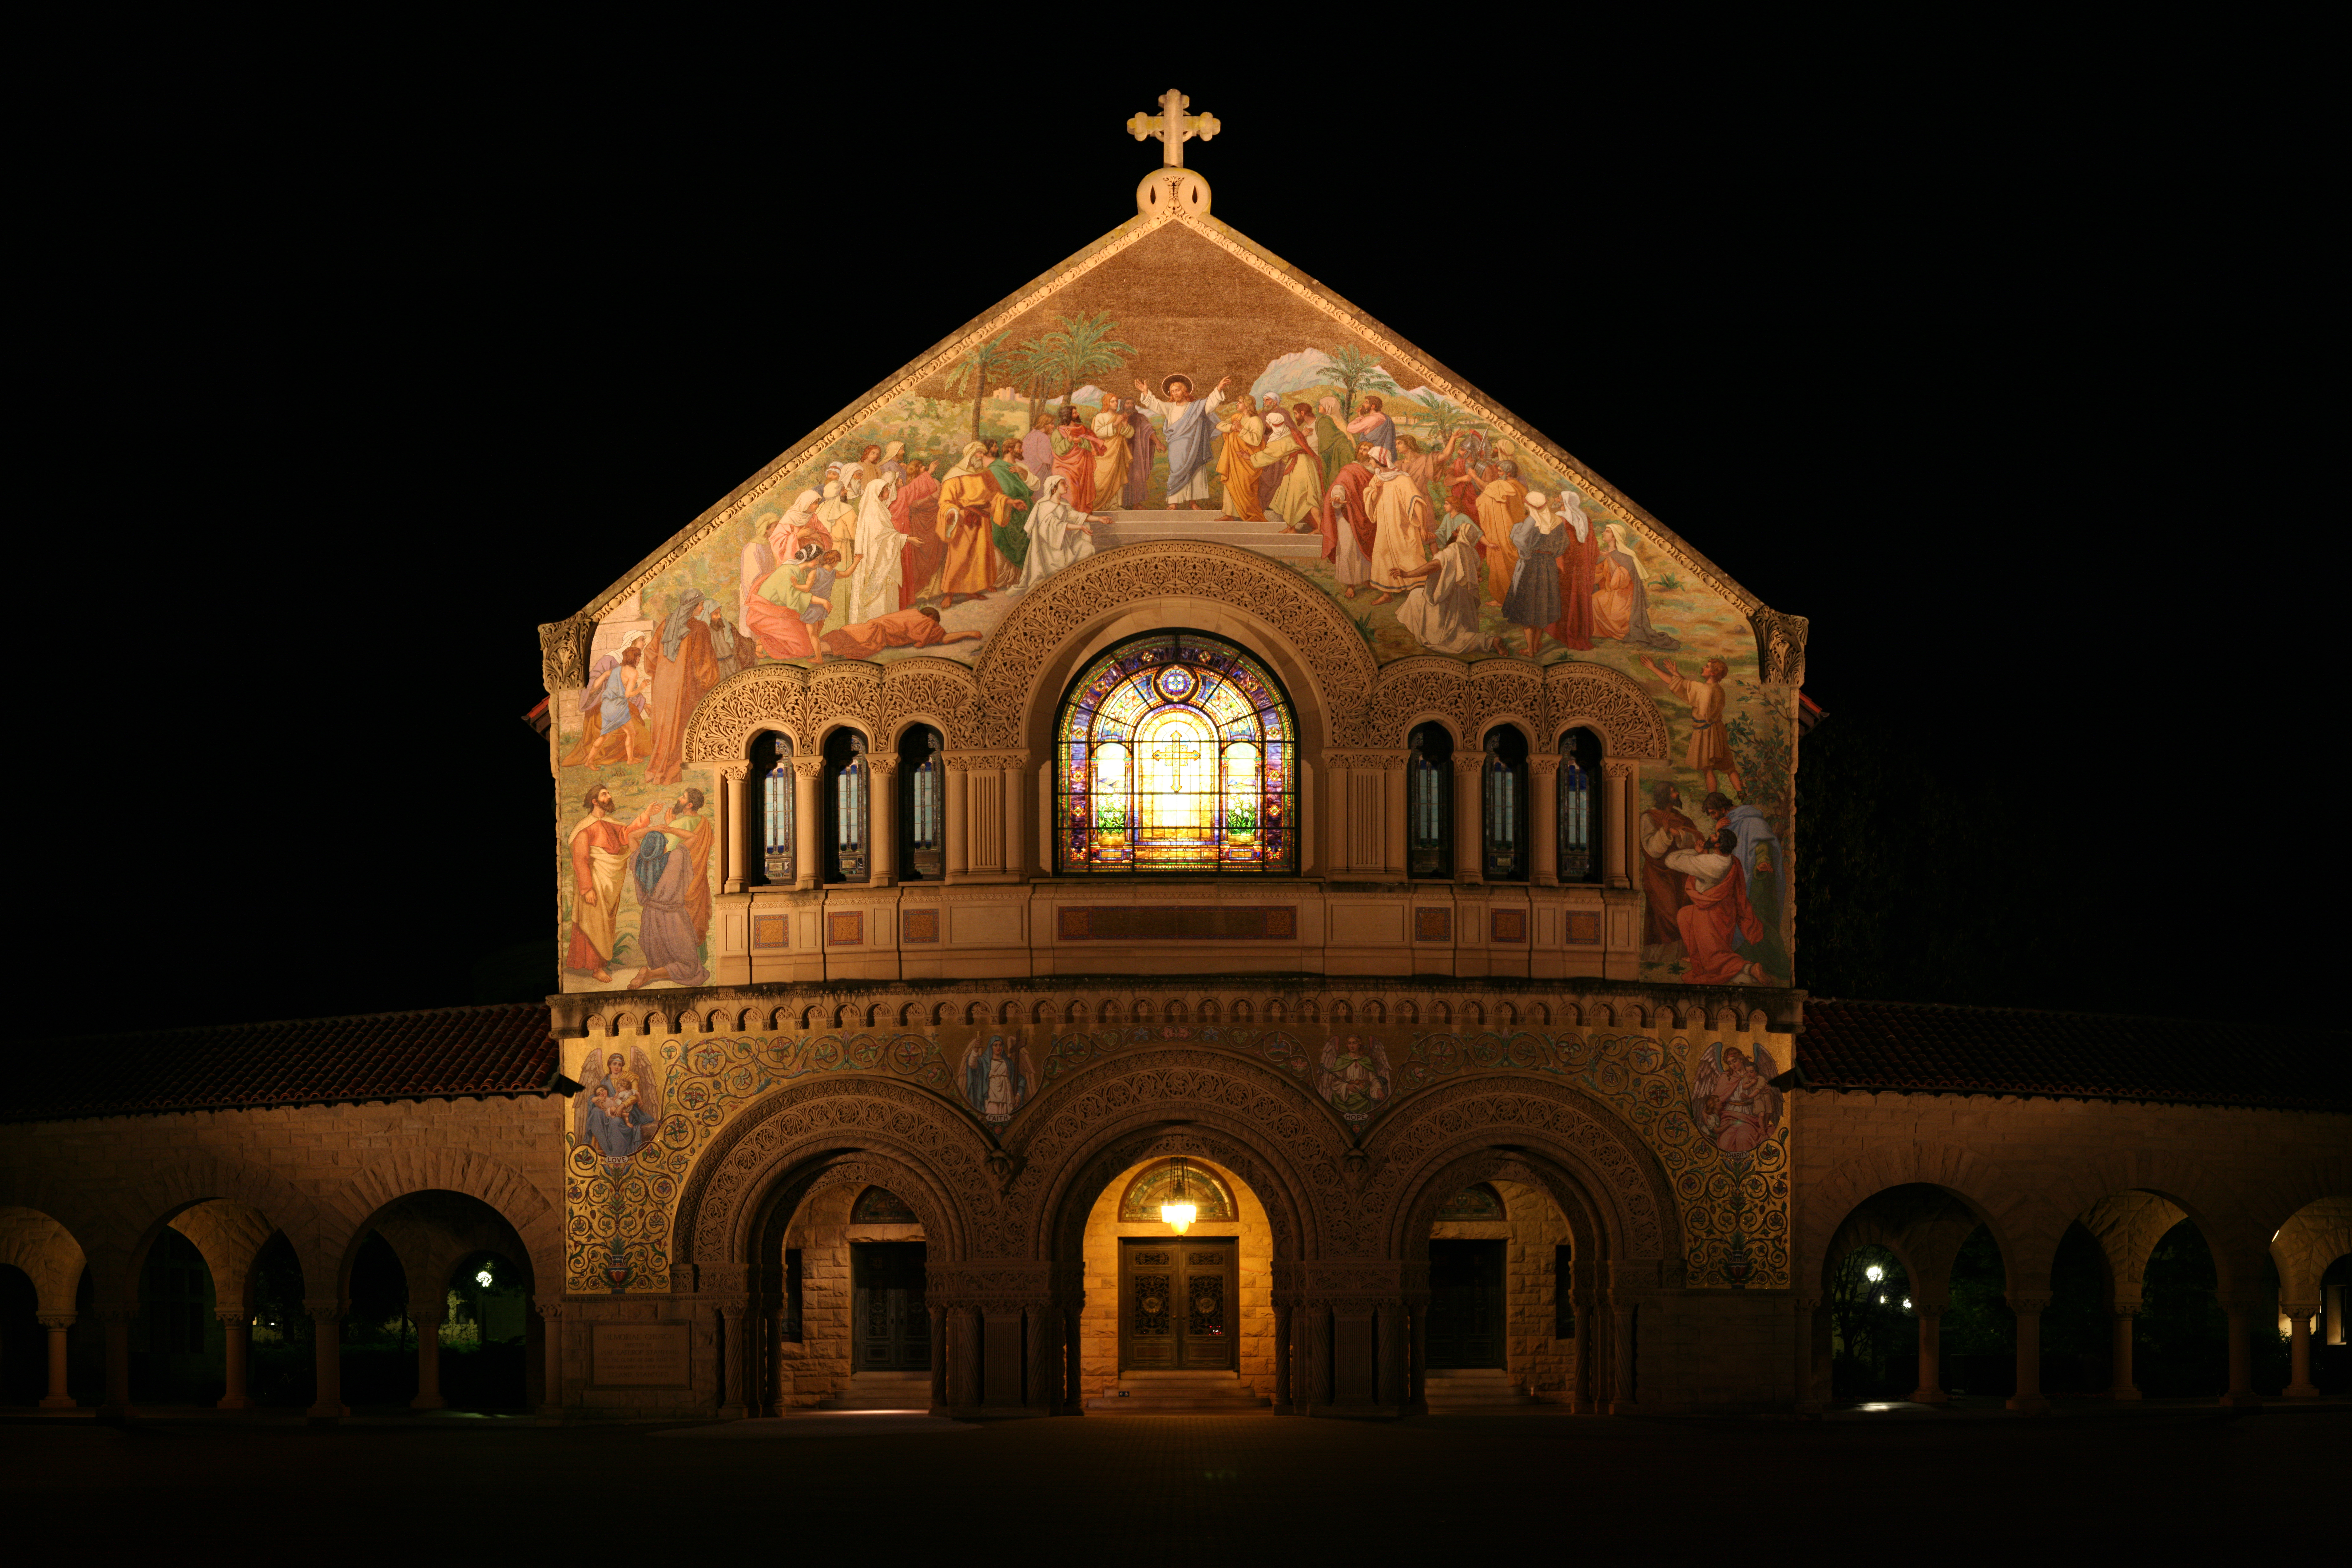 Stanford Memorial Church, High Resolution Images